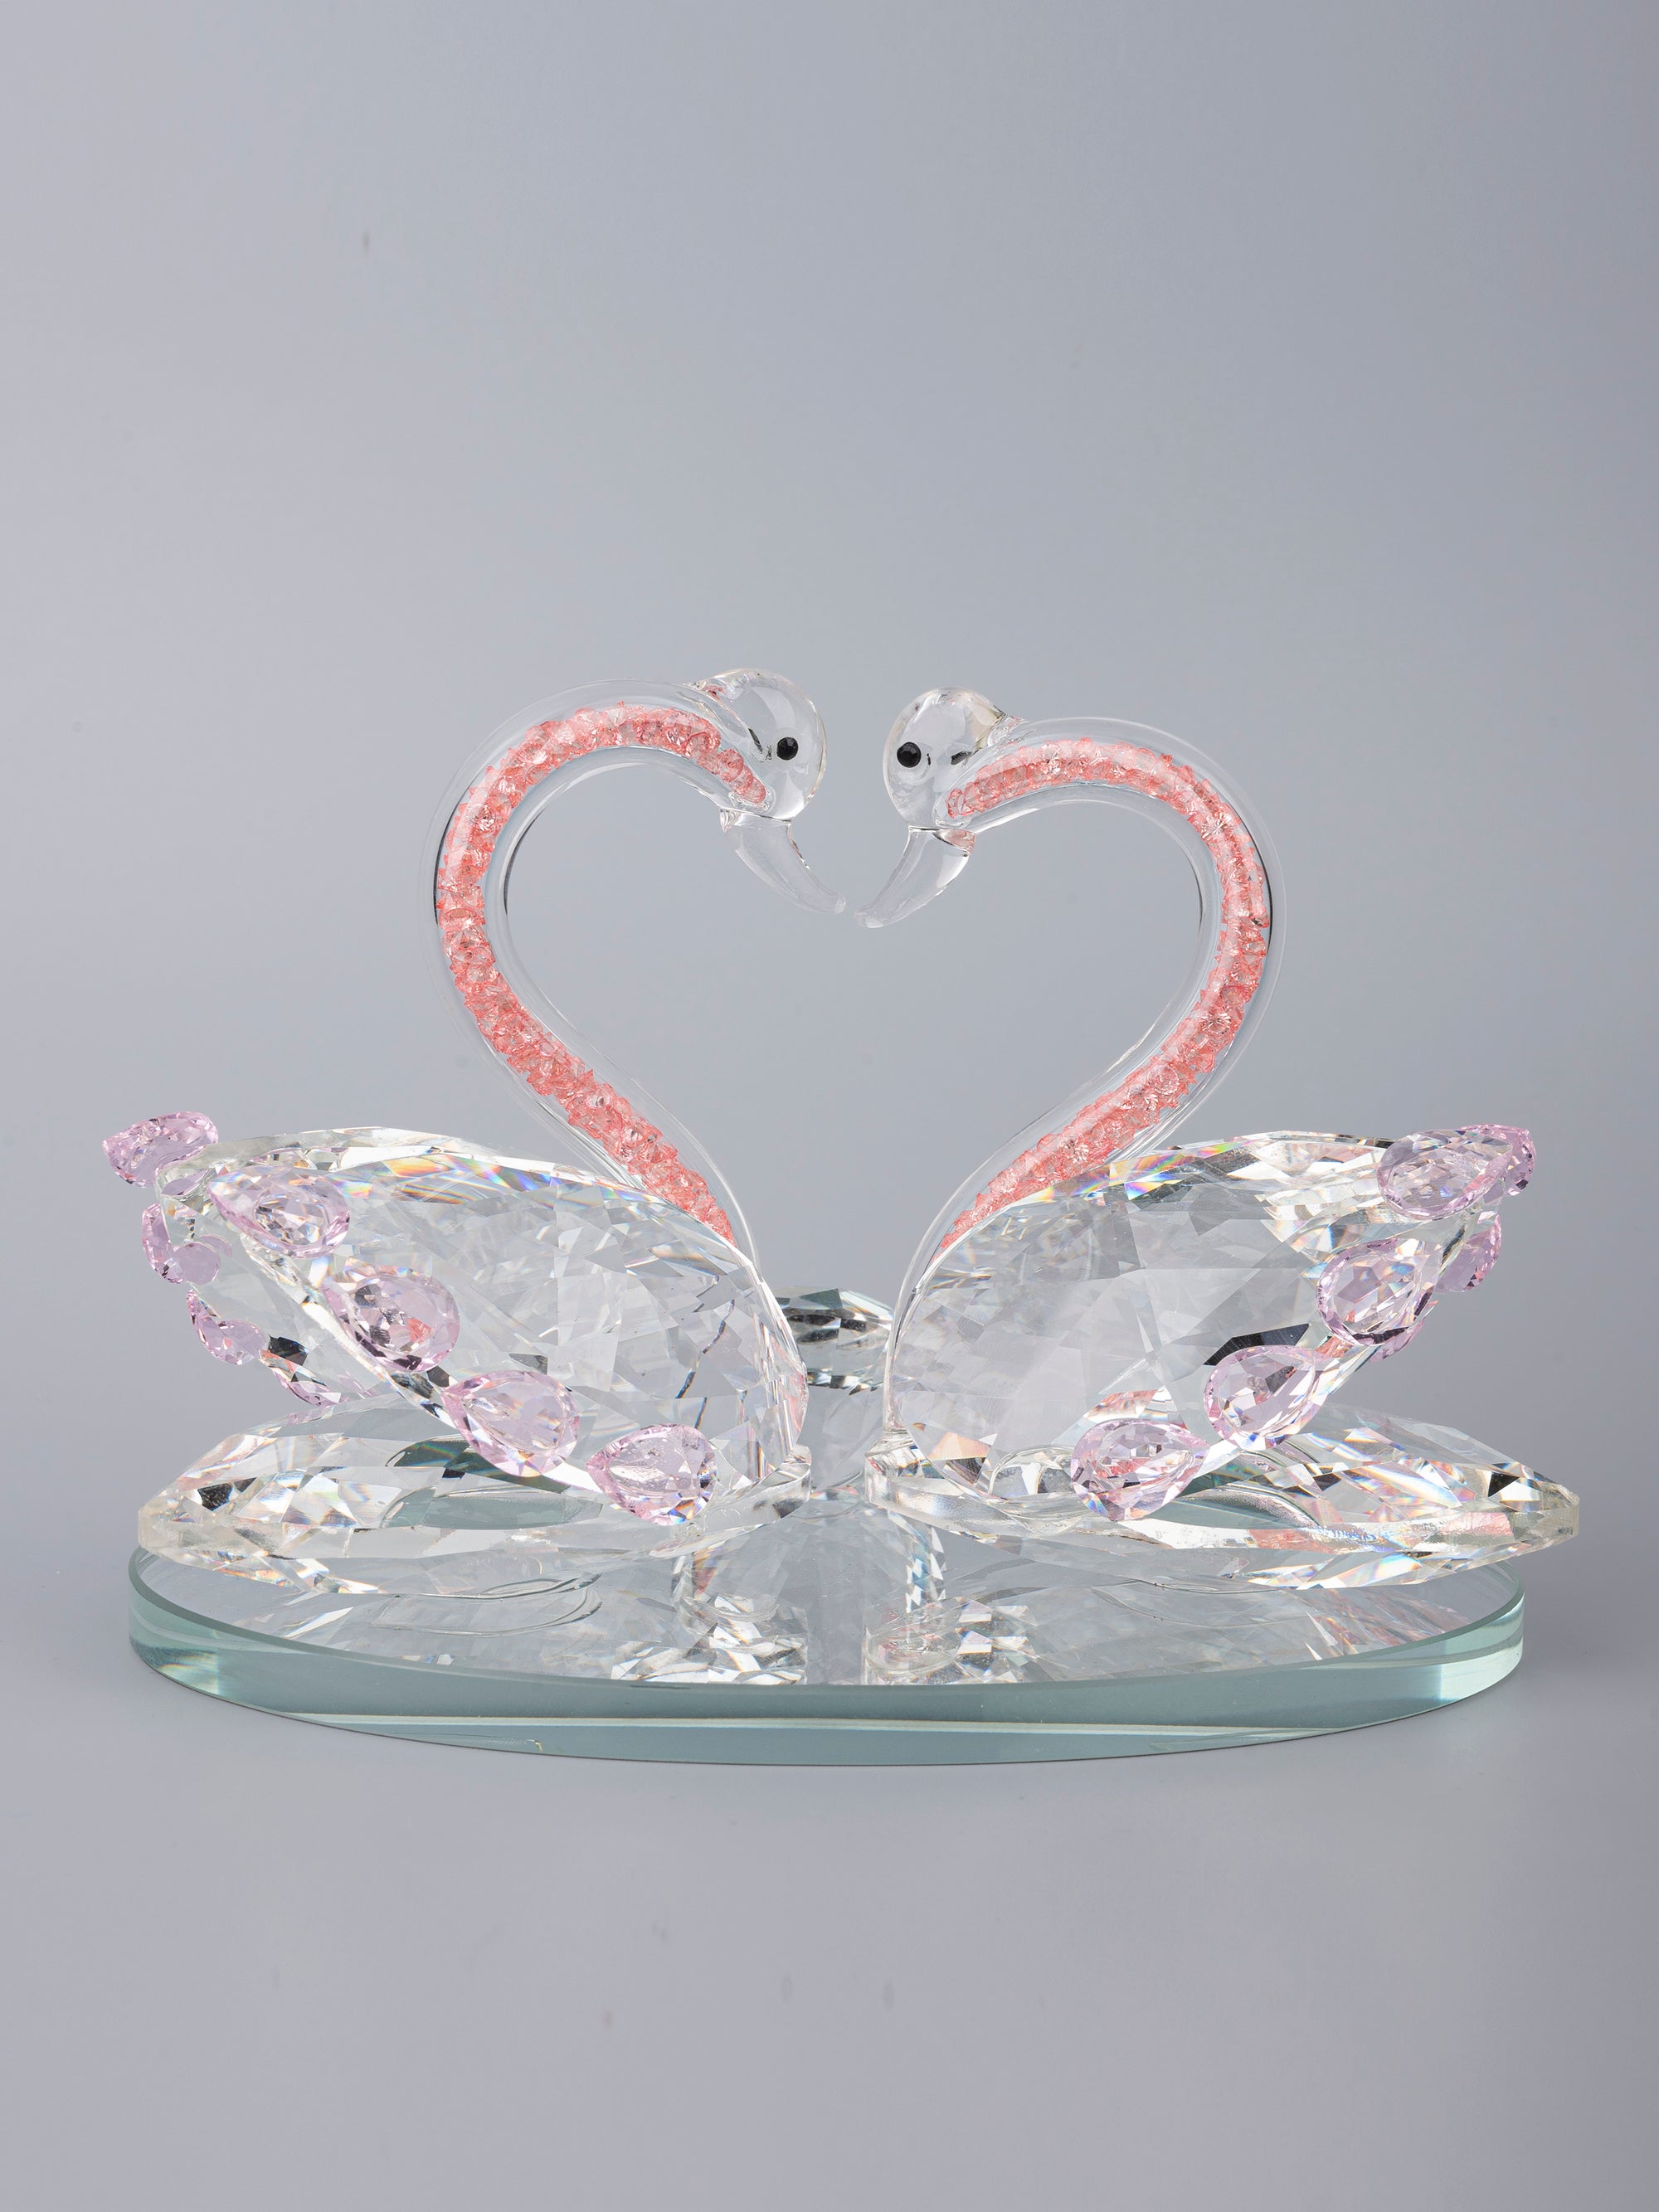 Glass Crafted Romantic Swan Couple Home Decor - The Heritage Artifacts